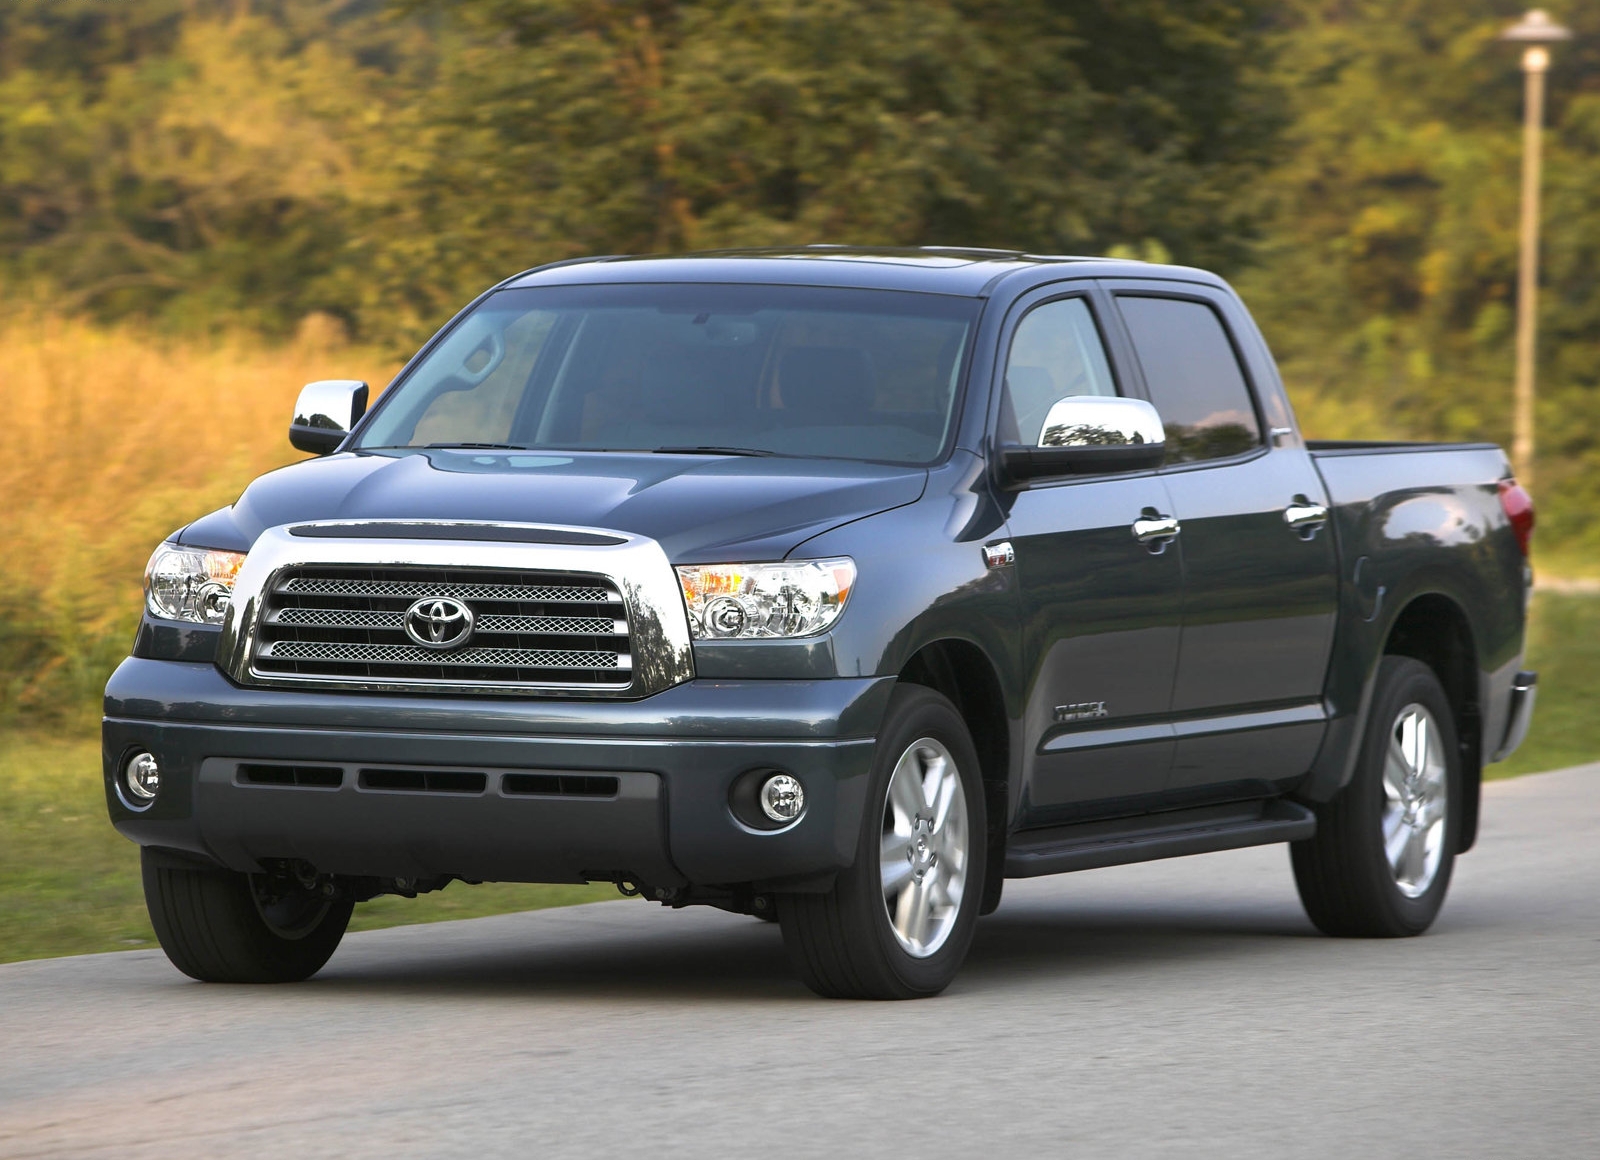 2009 Toyota Tundra 4.7 Full Specs, Features and Price | CarBuzz